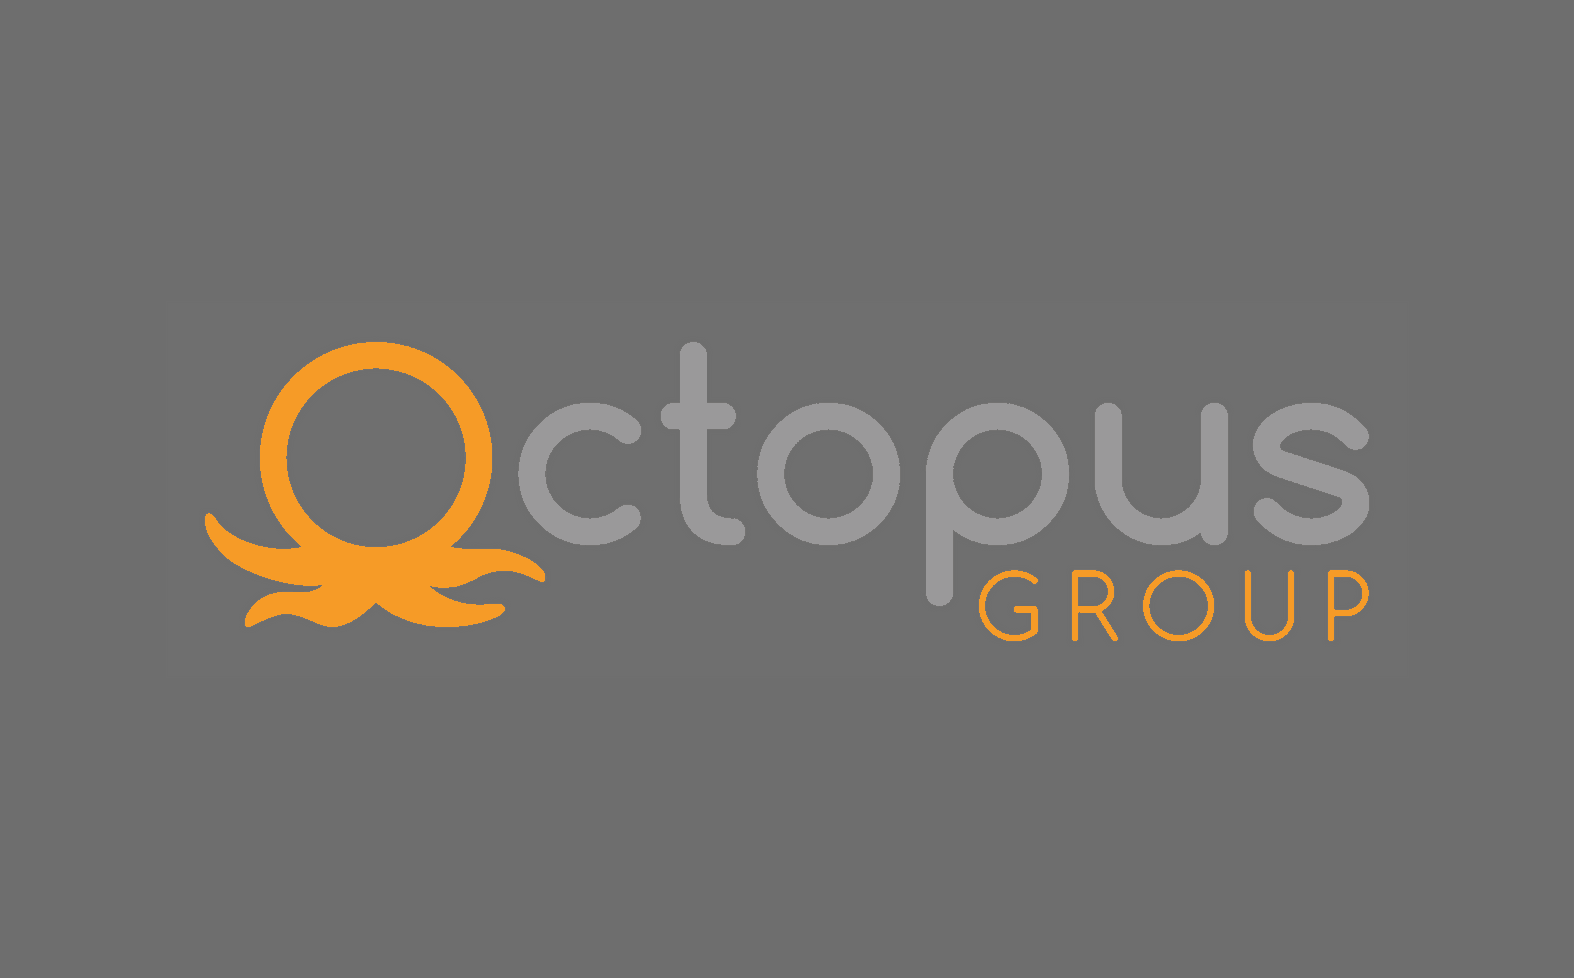 The next survey and earn money app is Octopus Group.